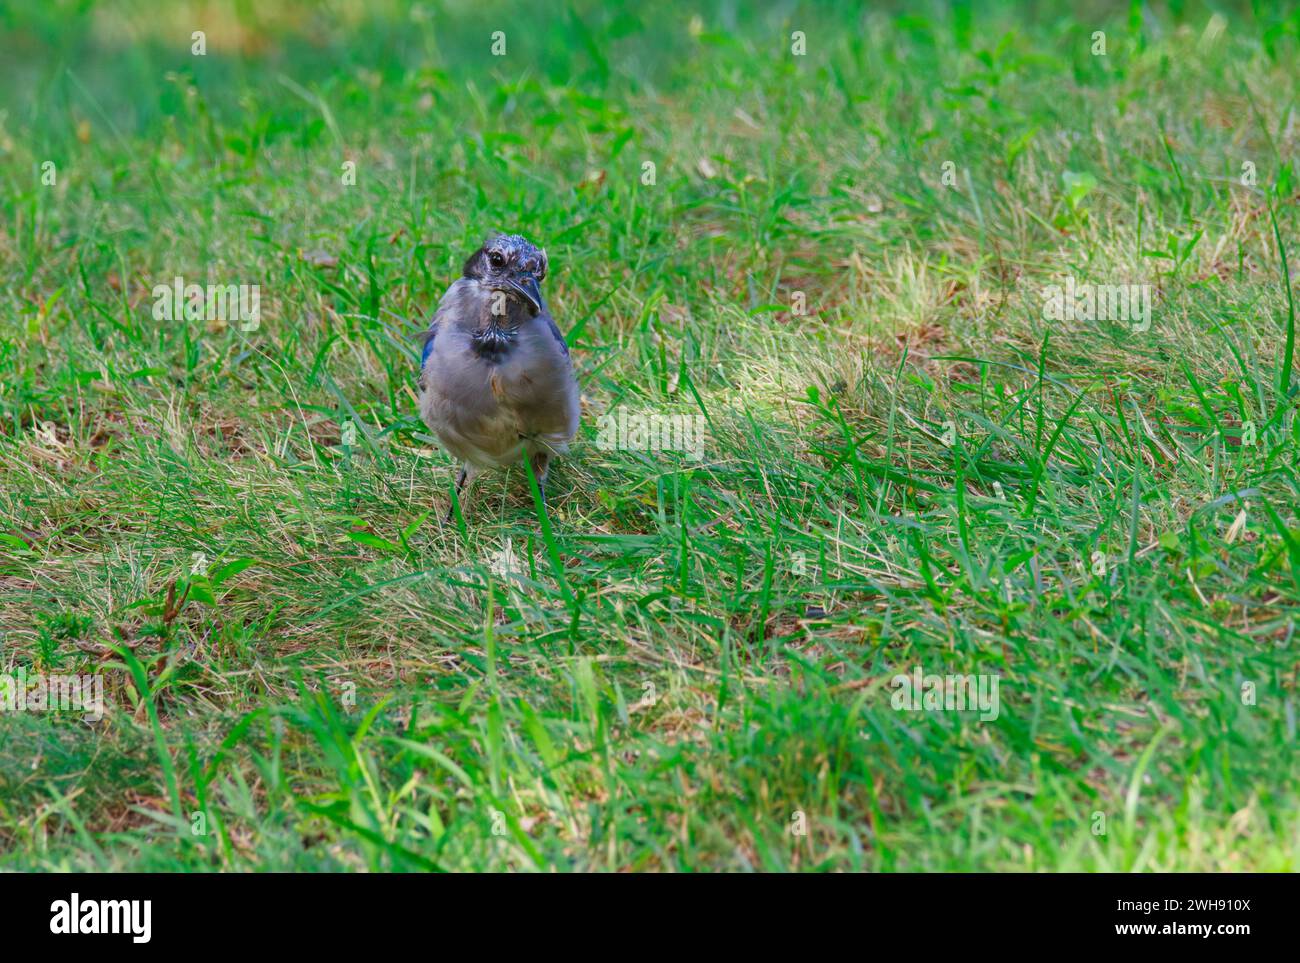 A bluejay with disheveled feathers on the grass Stock Photo